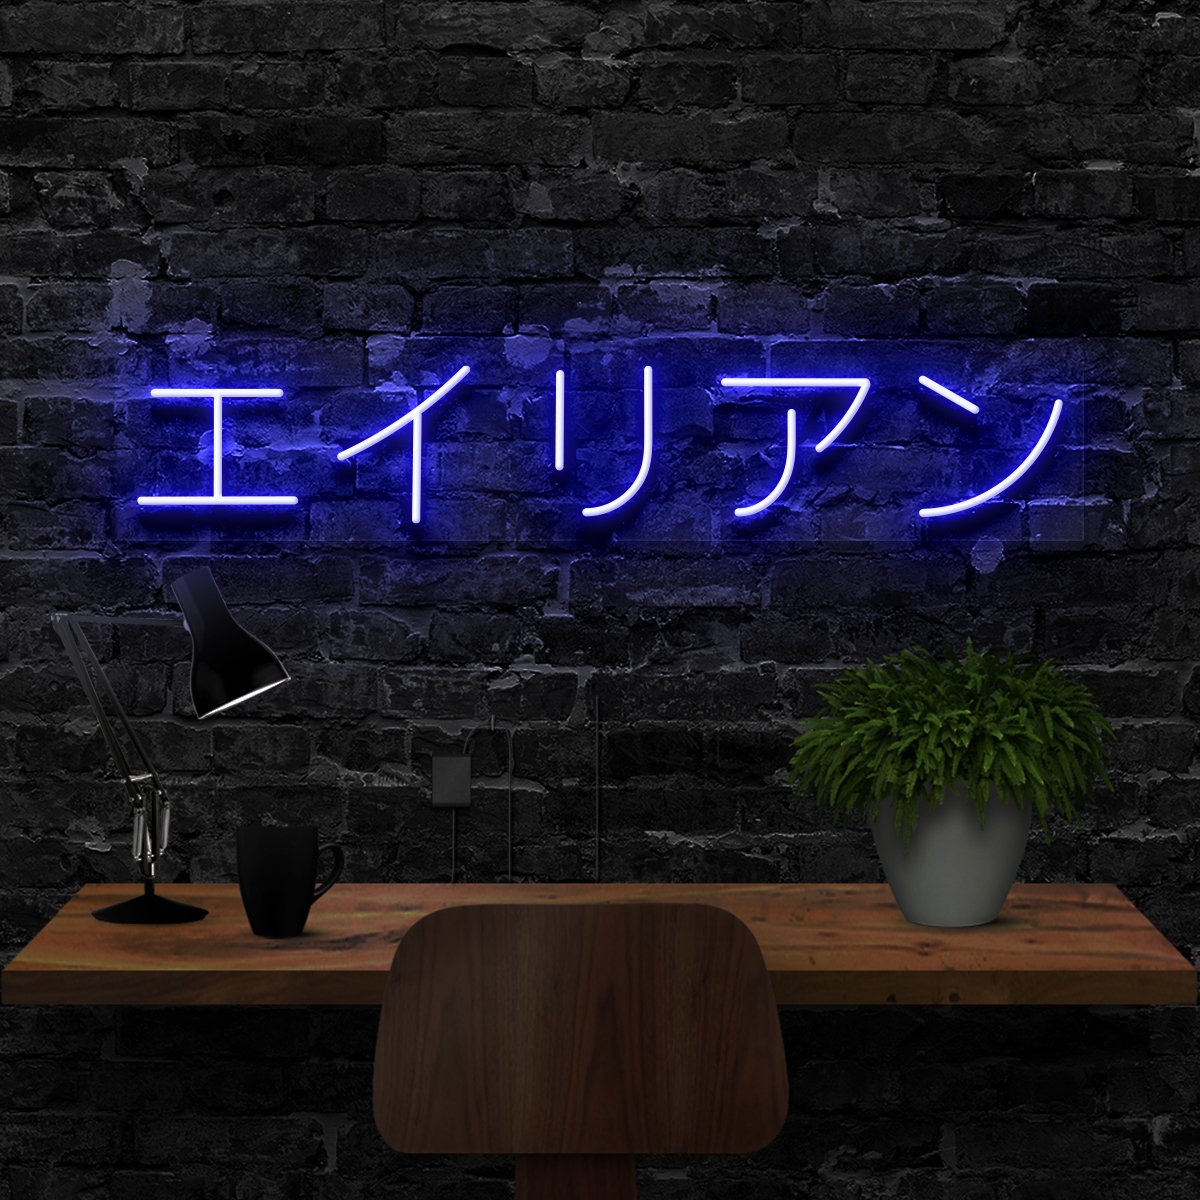 "Alien - Japanese Symbols" Neon Sign 40cm (1.3ft) / Blue / LED Neon by Neon Icons